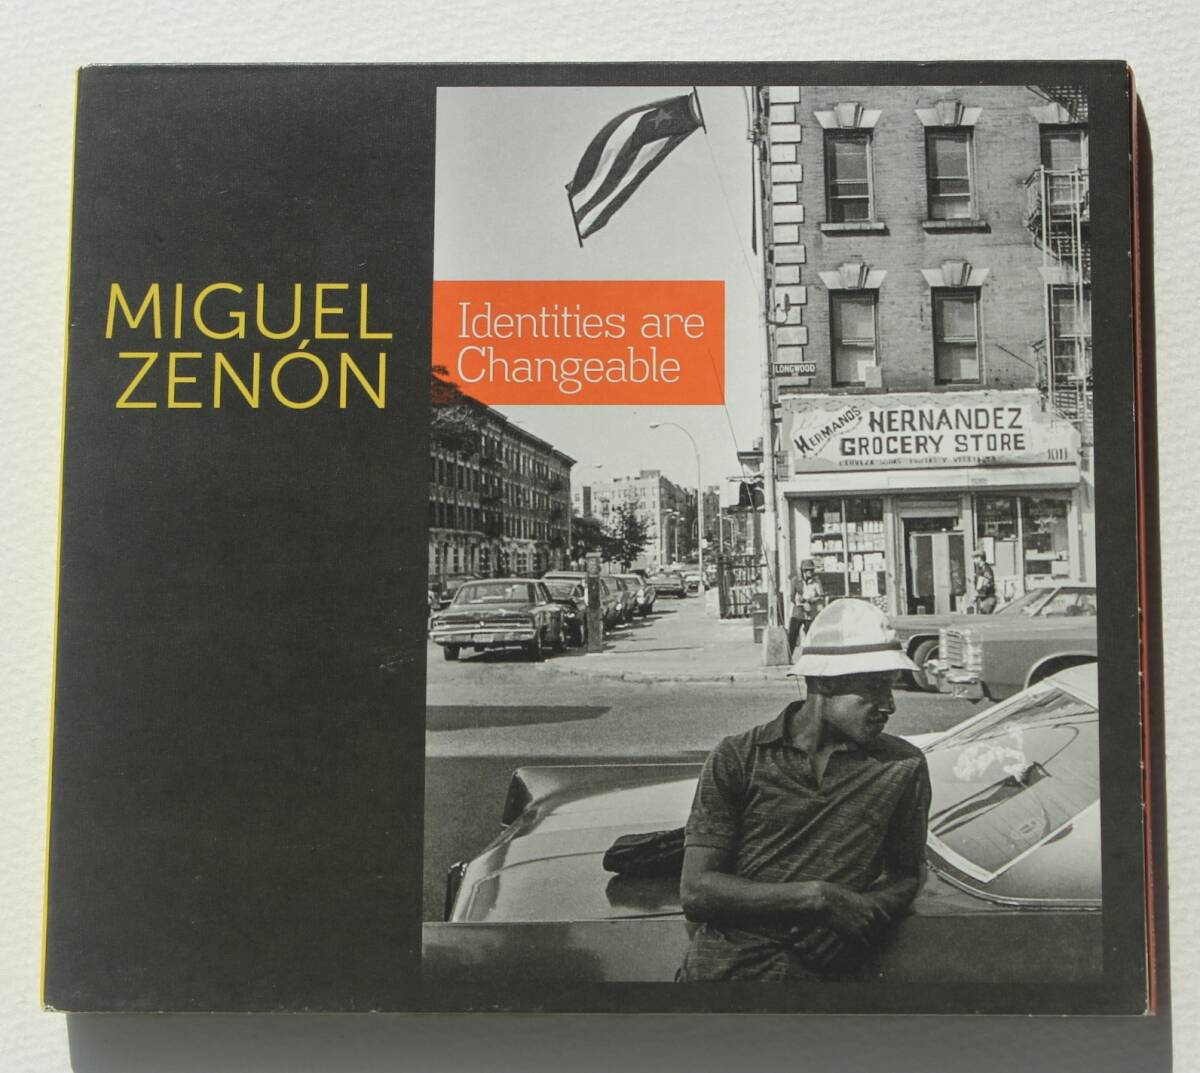 Miguel Zenon『Identities Are Changeable』現代屈指のアルト奏者 カルテットとビッグバンド Will Vinson SFJAZZ Collectiveのメンバー_画像1